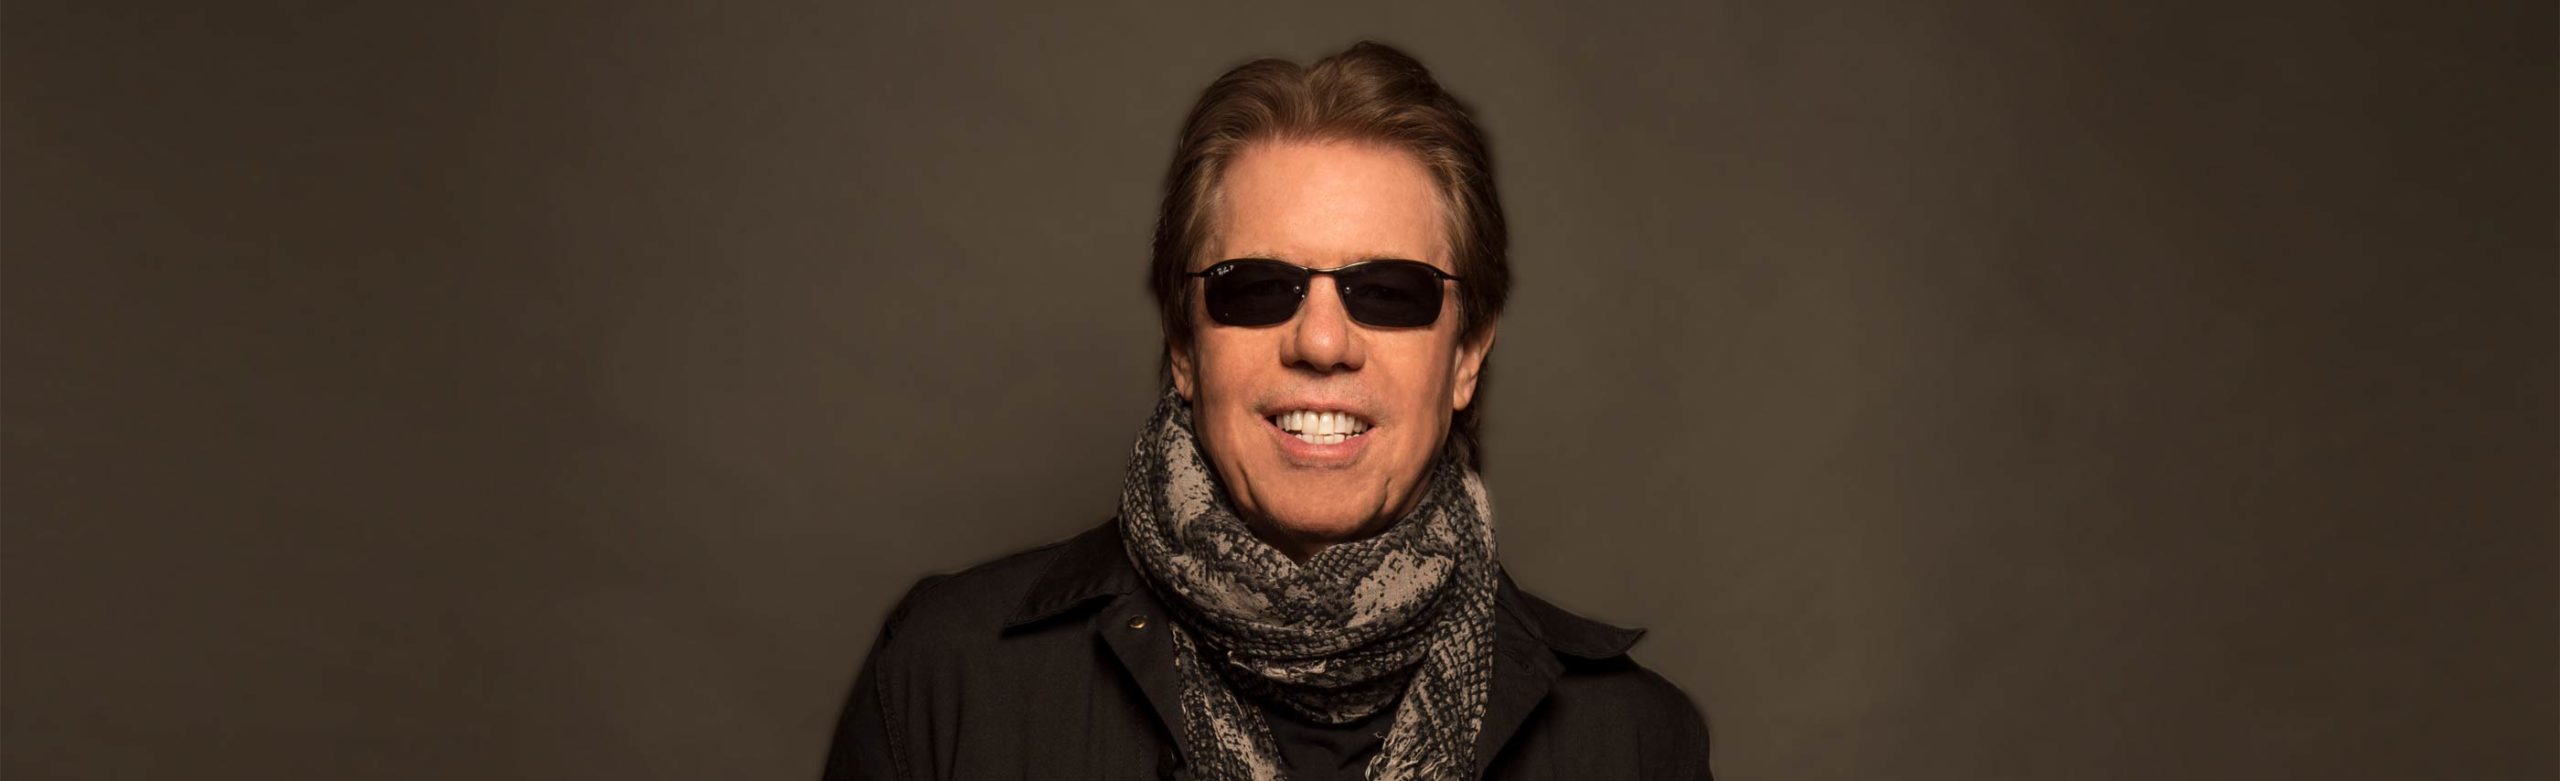 Event Info: George Thorogood & The Destroyers at The Wilma 2021 Image